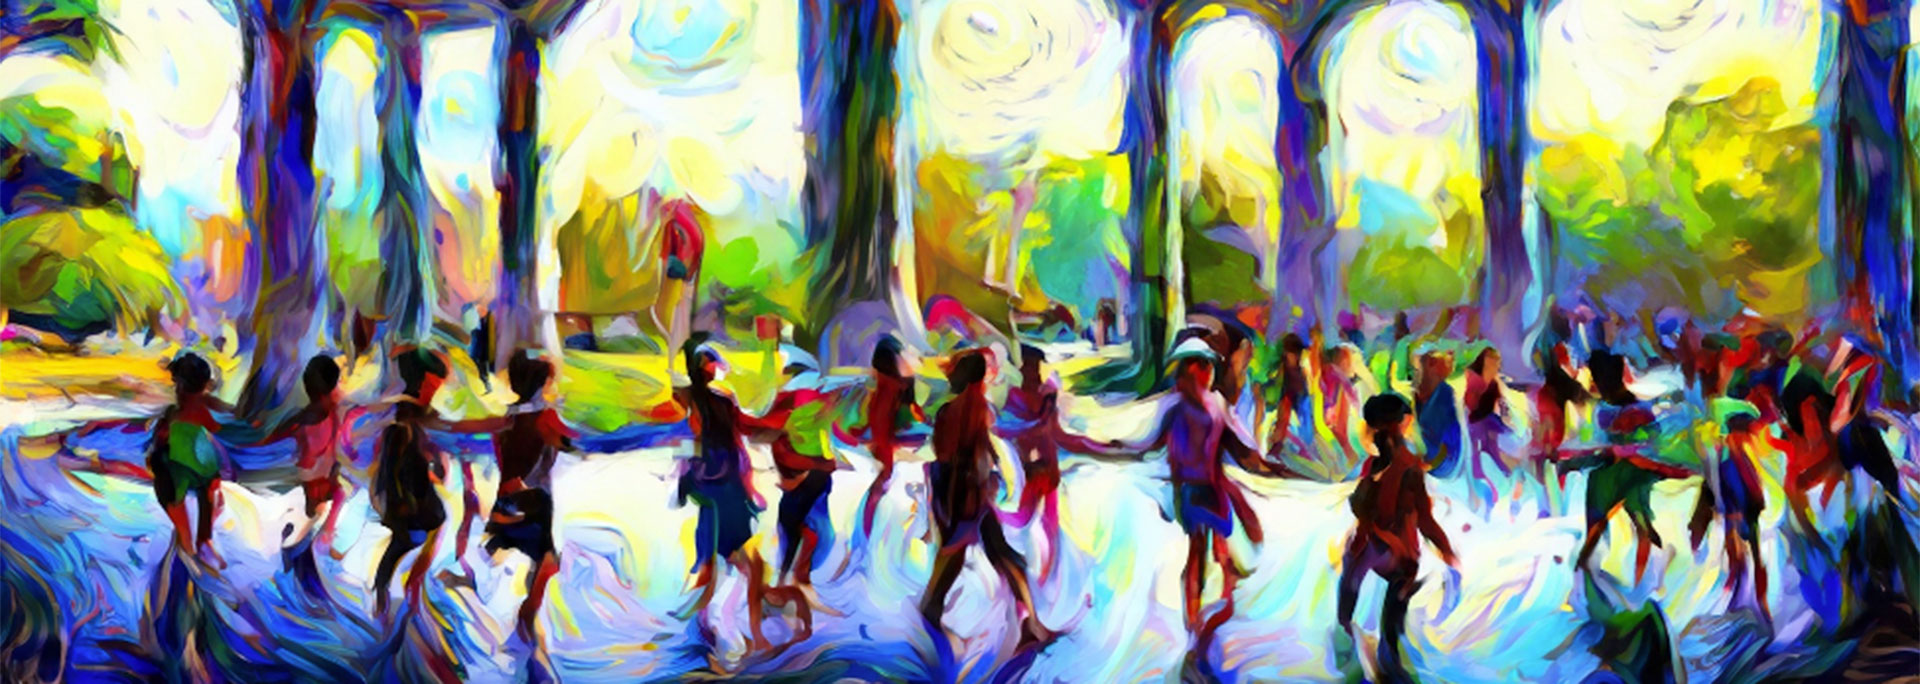 Impressionist looking image of people dancing